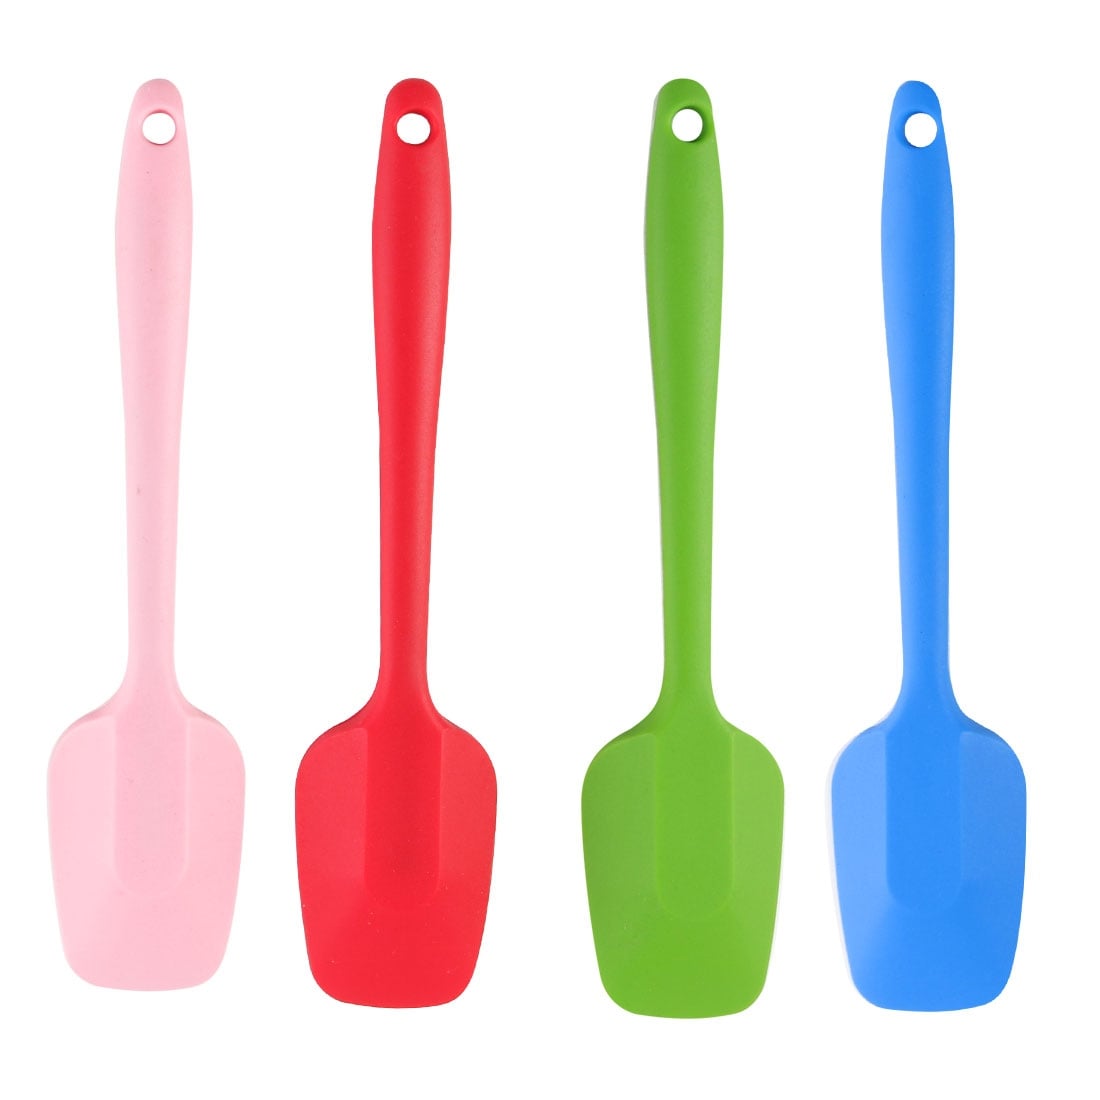 https://ak1.ostkcdn.com/images/products/is/images/direct/fe6069b7c4a3f1d0c690fa2f11dd94db63451cf2/Silicone-Spatula-Heat-Resistant-Rubber-Flipping-Turner-for-Cooking.jpg